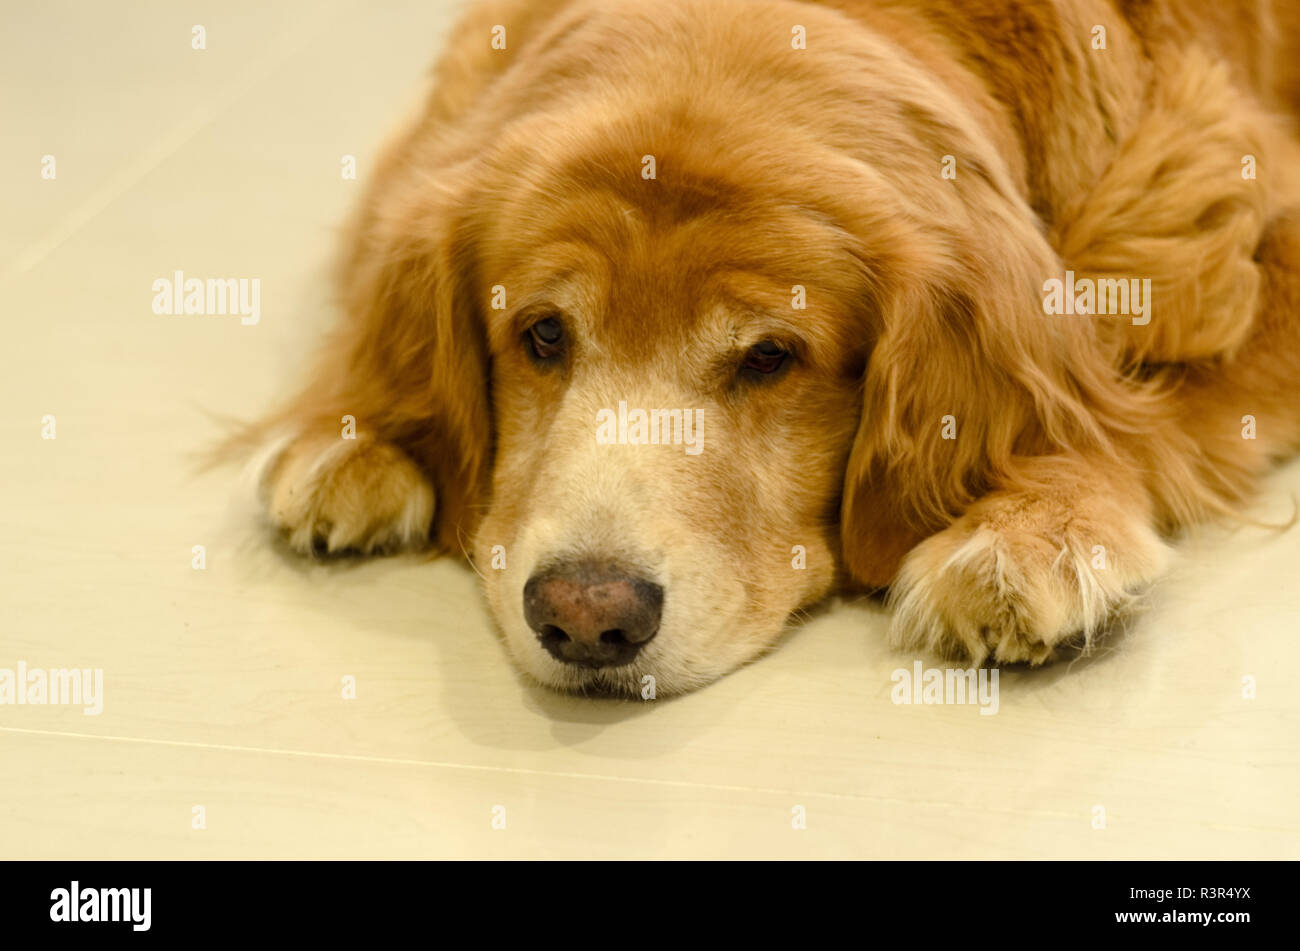 Front view close up picture of a Golden Retriever dog breed lay down on the white floor Stock Photo